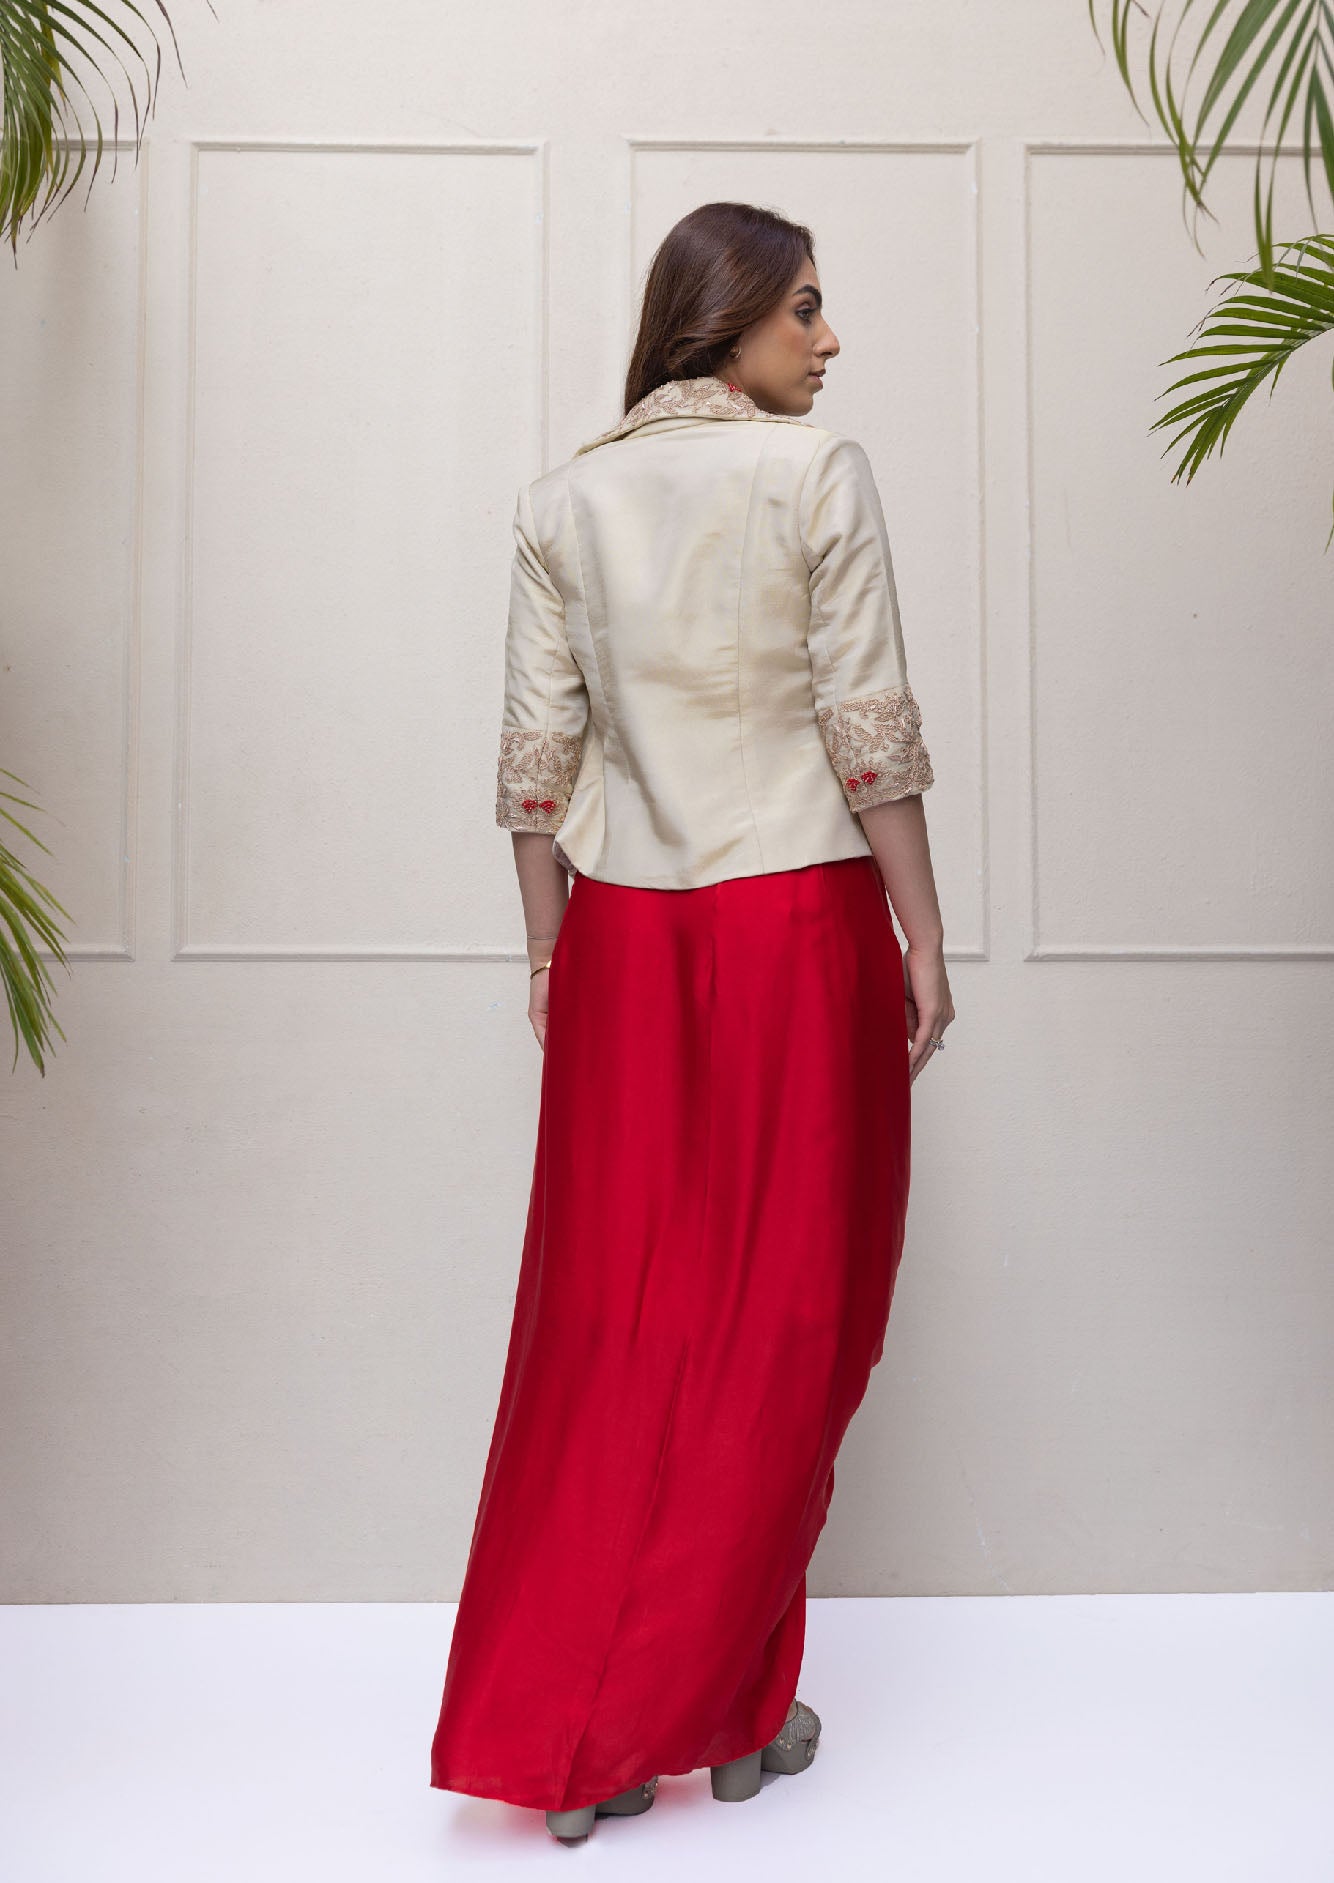 Shimmer Jacket and red draped skirt